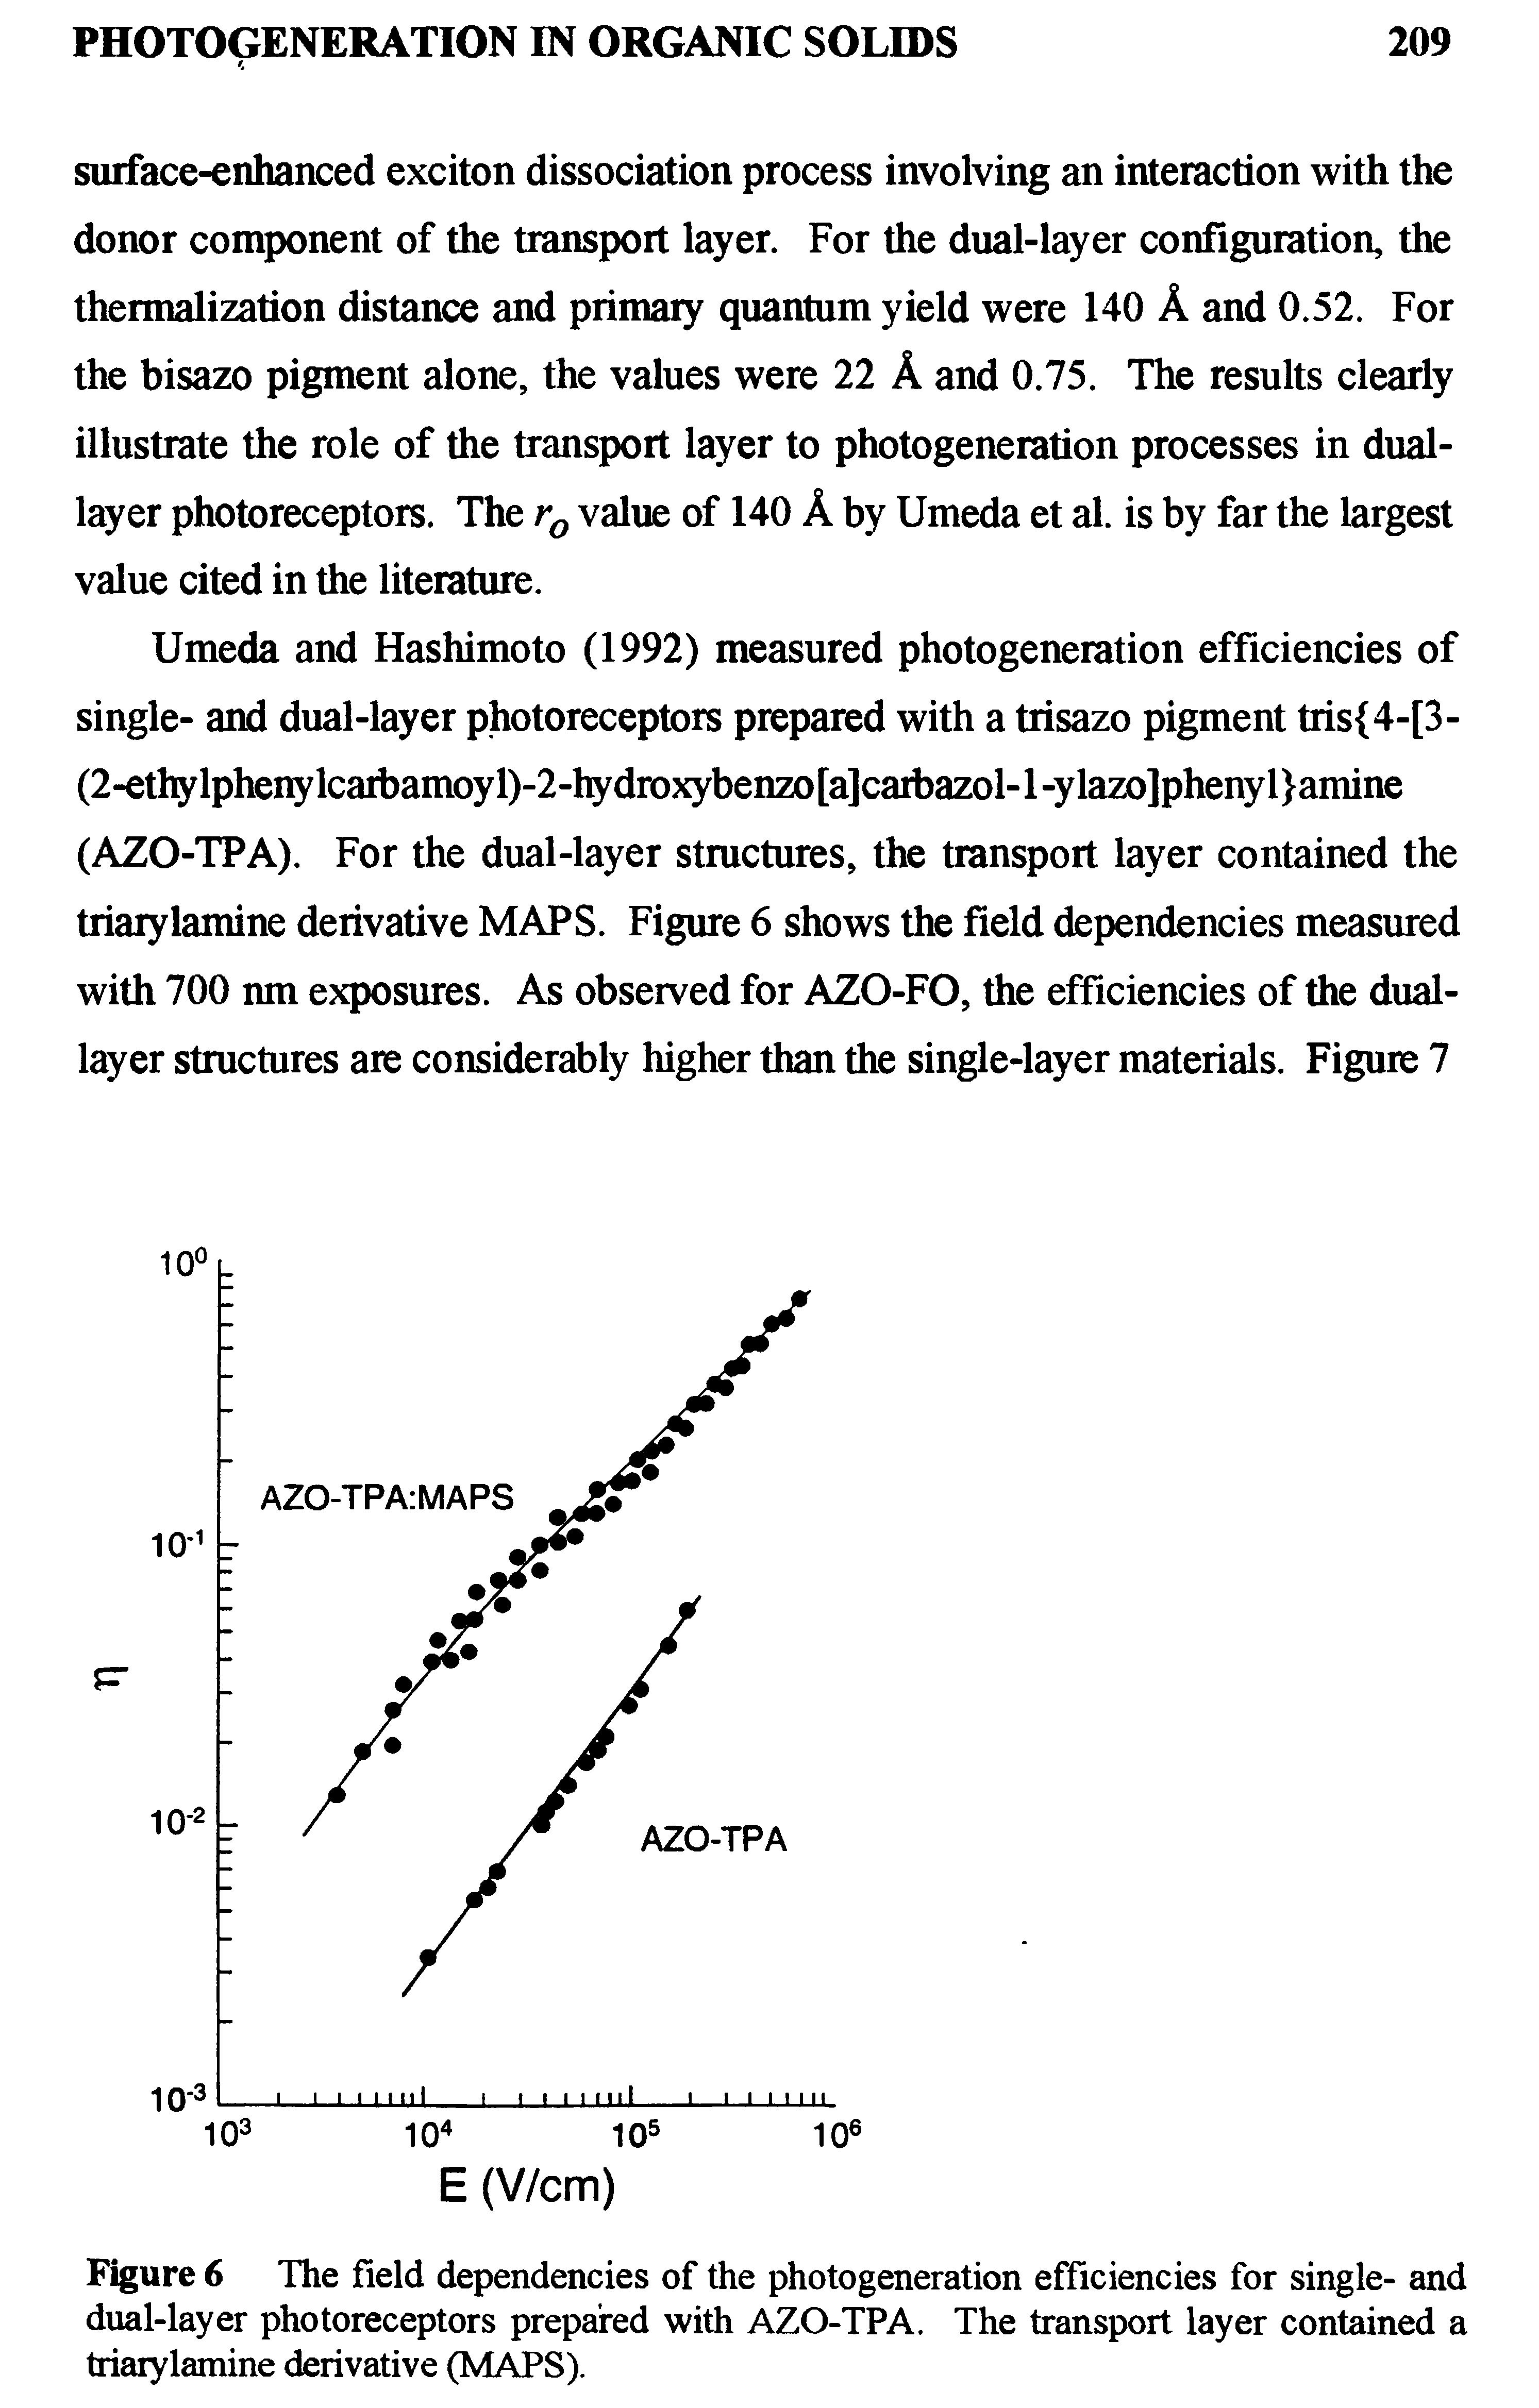 Figure 6 The field dependencies of the photogeneration efficiencies for single- and dual-layer photoreceptors prepared with AZO-TPA. The transport layer contained a triarylamine derivative (MAPS).